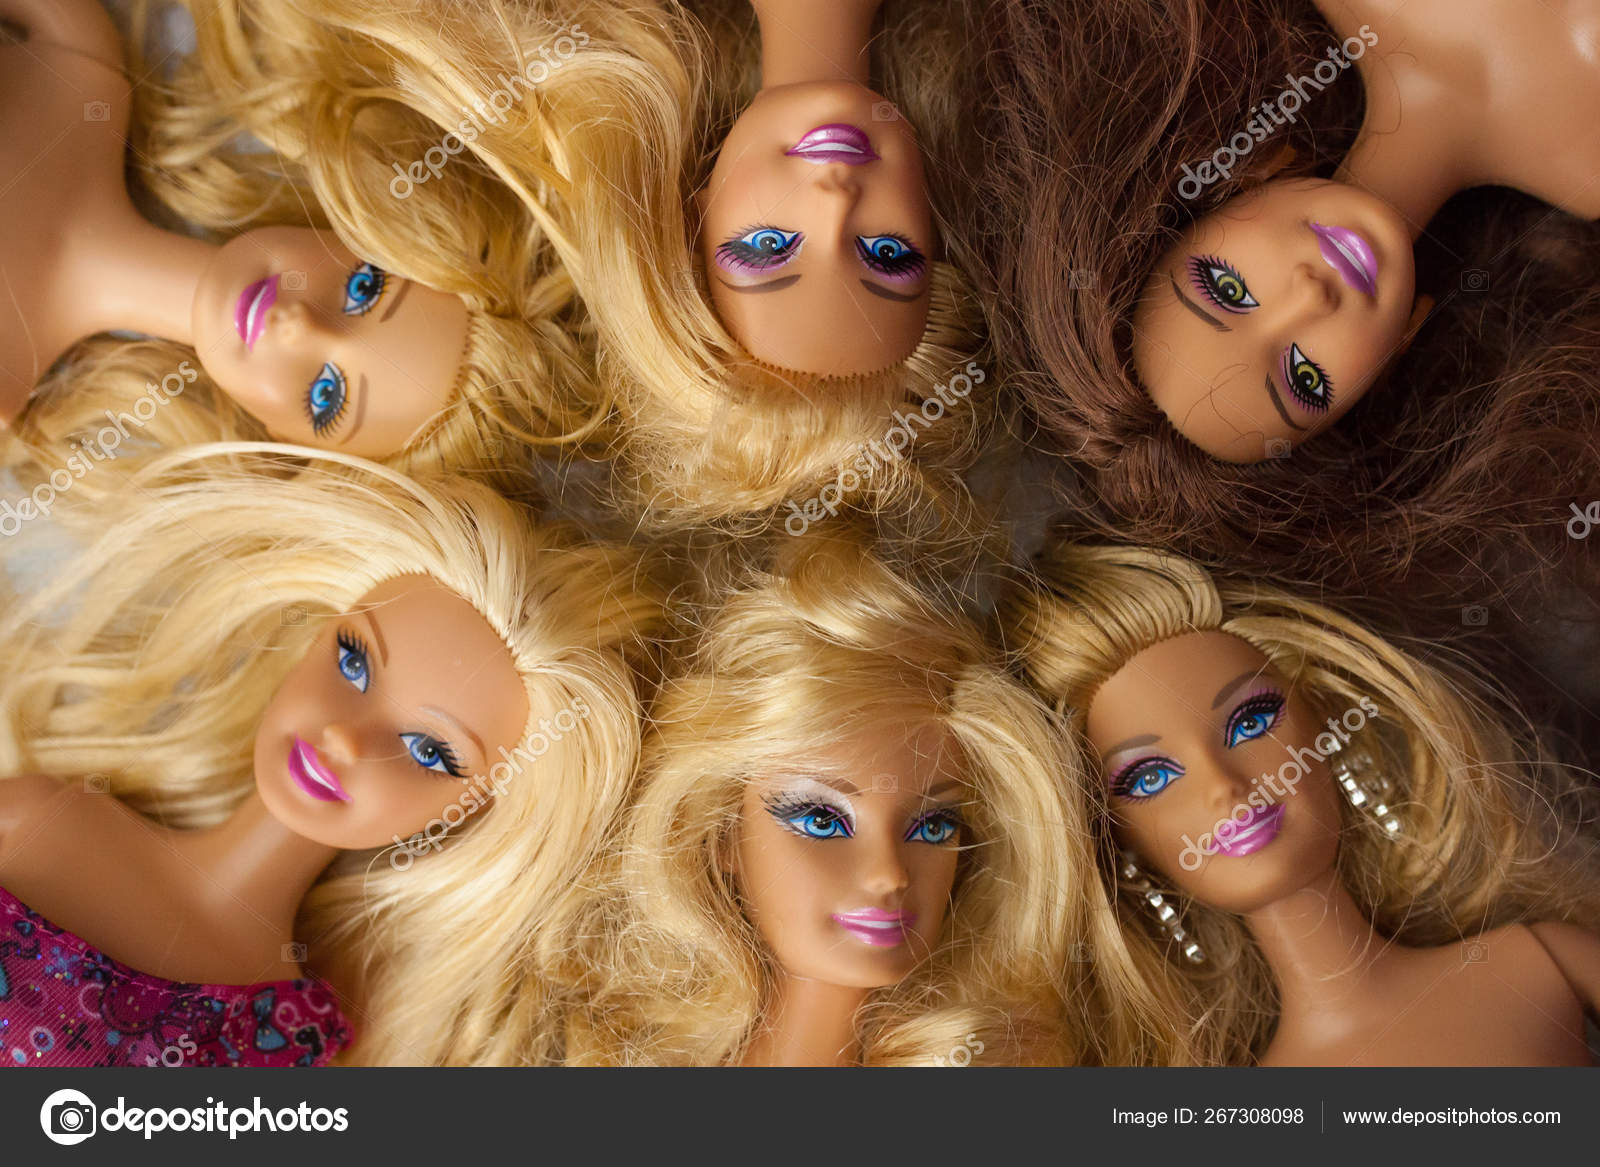 assimilation hjort Reporter Barbie Doll Collection – Stock Editorial Photo © luvemak #267308098